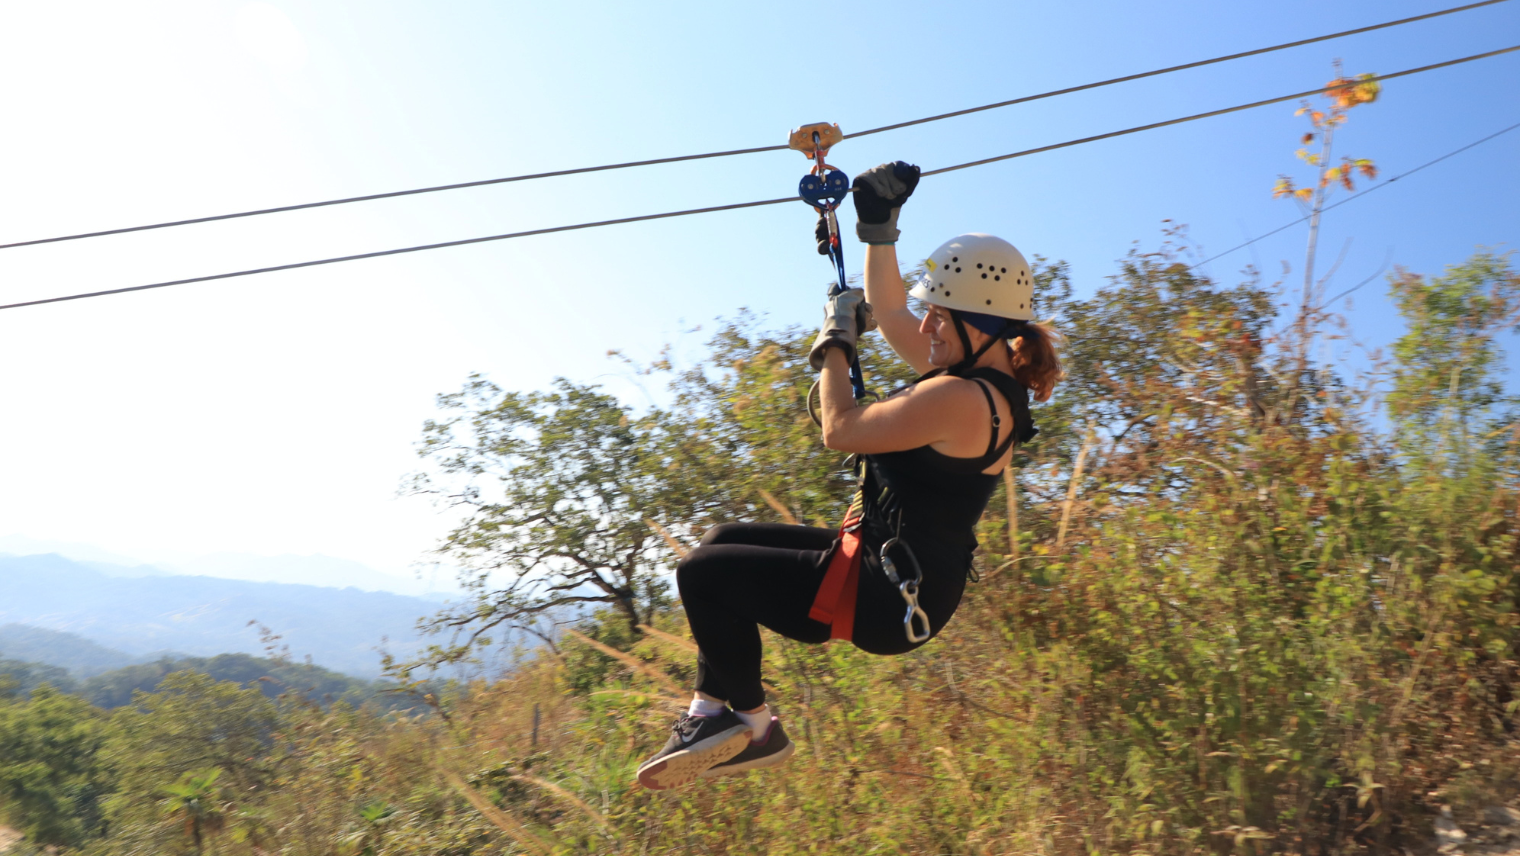 Image of a person on a zipwire